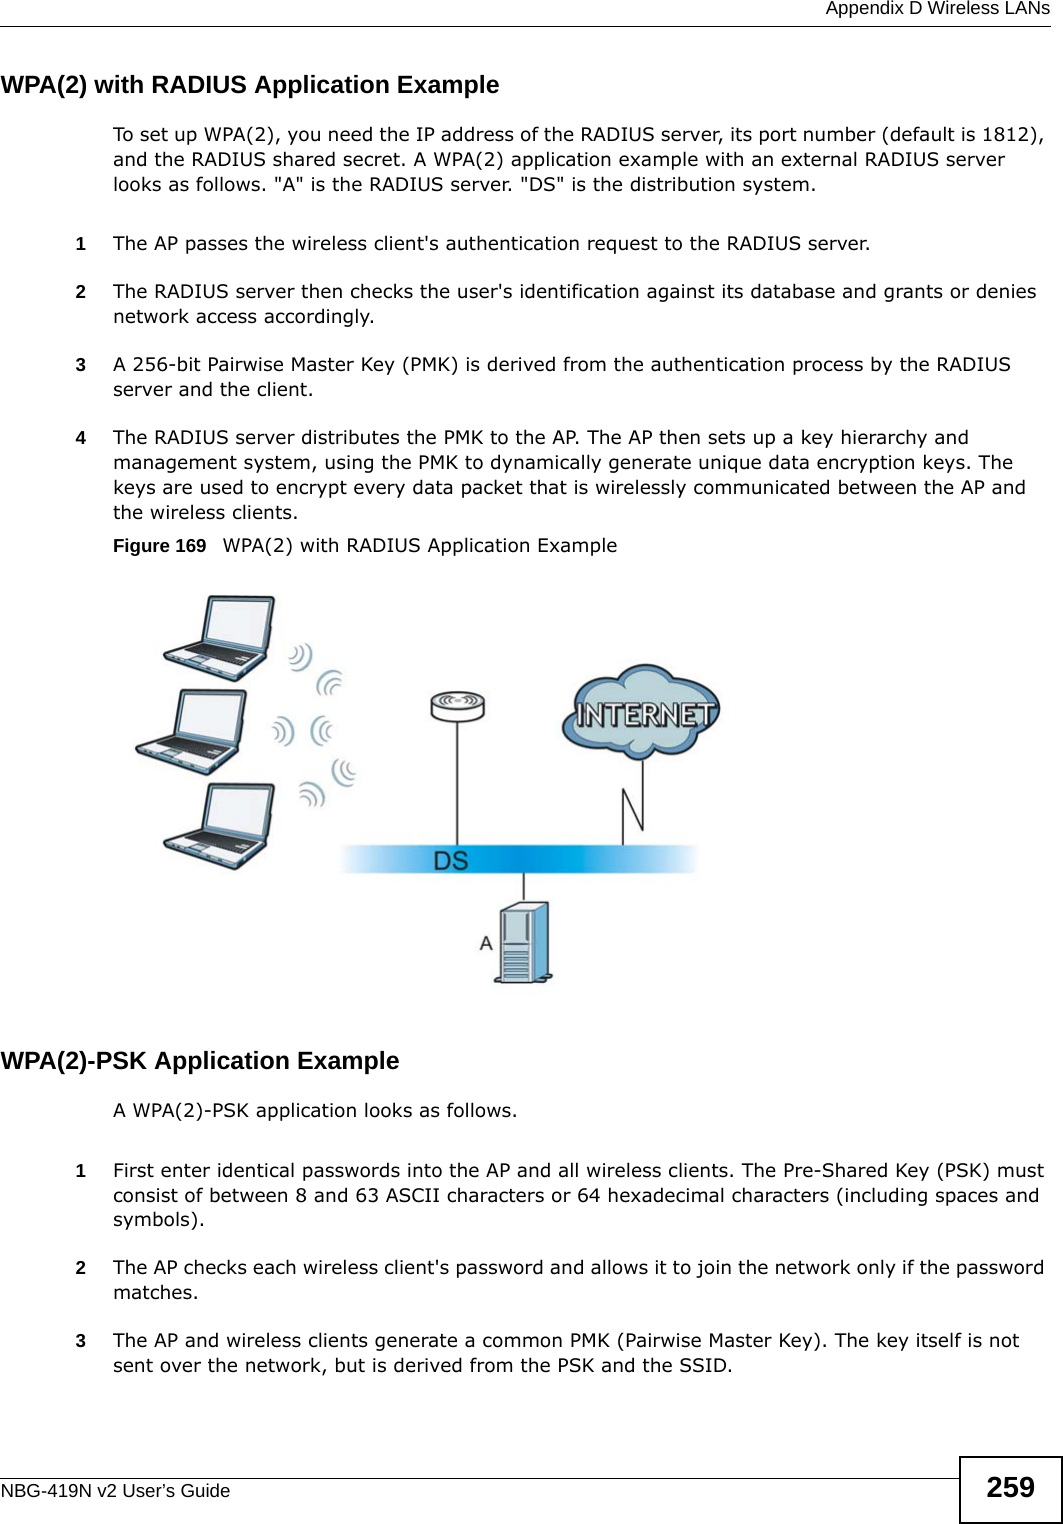  Appendix D Wireless LANsNBG-419N v2 User’s Guide 259WPA(2) with RADIUS Application ExampleTo set up WPA(2), you need the IP address of the RADIUS server, its port number (default is 1812), and the RADIUS shared secret. A WPA(2) application example with an external RADIUS server looks as follows. &quot;A&quot; is the RADIUS server. &quot;DS&quot; is the distribution system.1The AP passes the wireless client&apos;s authentication request to the RADIUS server.2The RADIUS server then checks the user&apos;s identification against its database and grants or denies network access accordingly.3A 256-bit Pairwise Master Key (PMK) is derived from the authentication process by the RADIUS server and the client.4The RADIUS server distributes the PMK to the AP. The AP then sets up a key hierarchy and management system, using the PMK to dynamically generate unique data encryption keys. The keys are used to encrypt every data packet that is wirelessly communicated between the AP and the wireless clients.Figure 169   WPA(2) with RADIUS Application ExampleWPA(2)-PSK Application ExampleA WPA(2)-PSK application looks as follows.1First enter identical passwords into the AP and all wireless clients. The Pre-Shared Key (PSK) must consist of between 8 and 63 ASCII characters or 64 hexadecimal characters (including spaces and symbols).2The AP checks each wireless client&apos;s password and allows it to join the network only if the password matches.3The AP and wireless clients generate a common PMK (Pairwise Master Key). The key itself is not sent over the network, but is derived from the PSK and the SSID. 